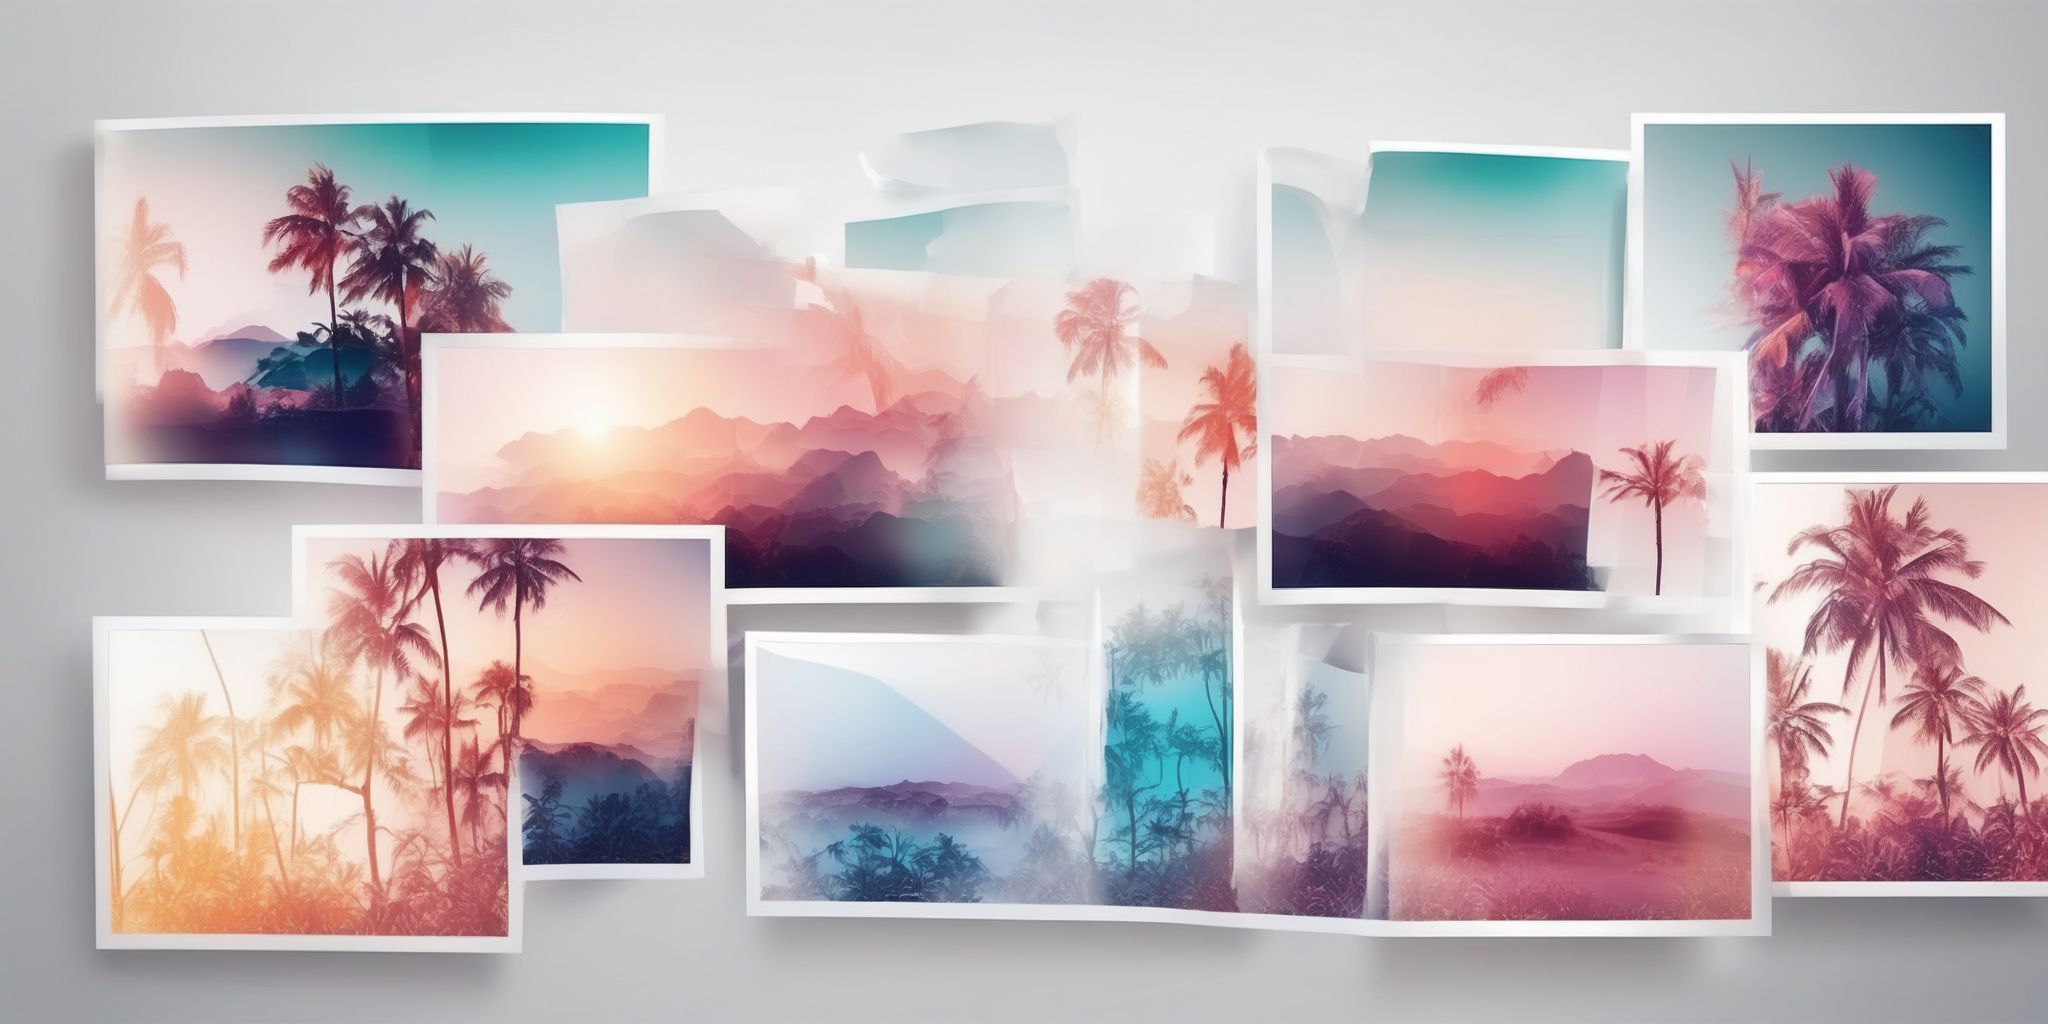 glossy photographs in illustration style with gradients and white background